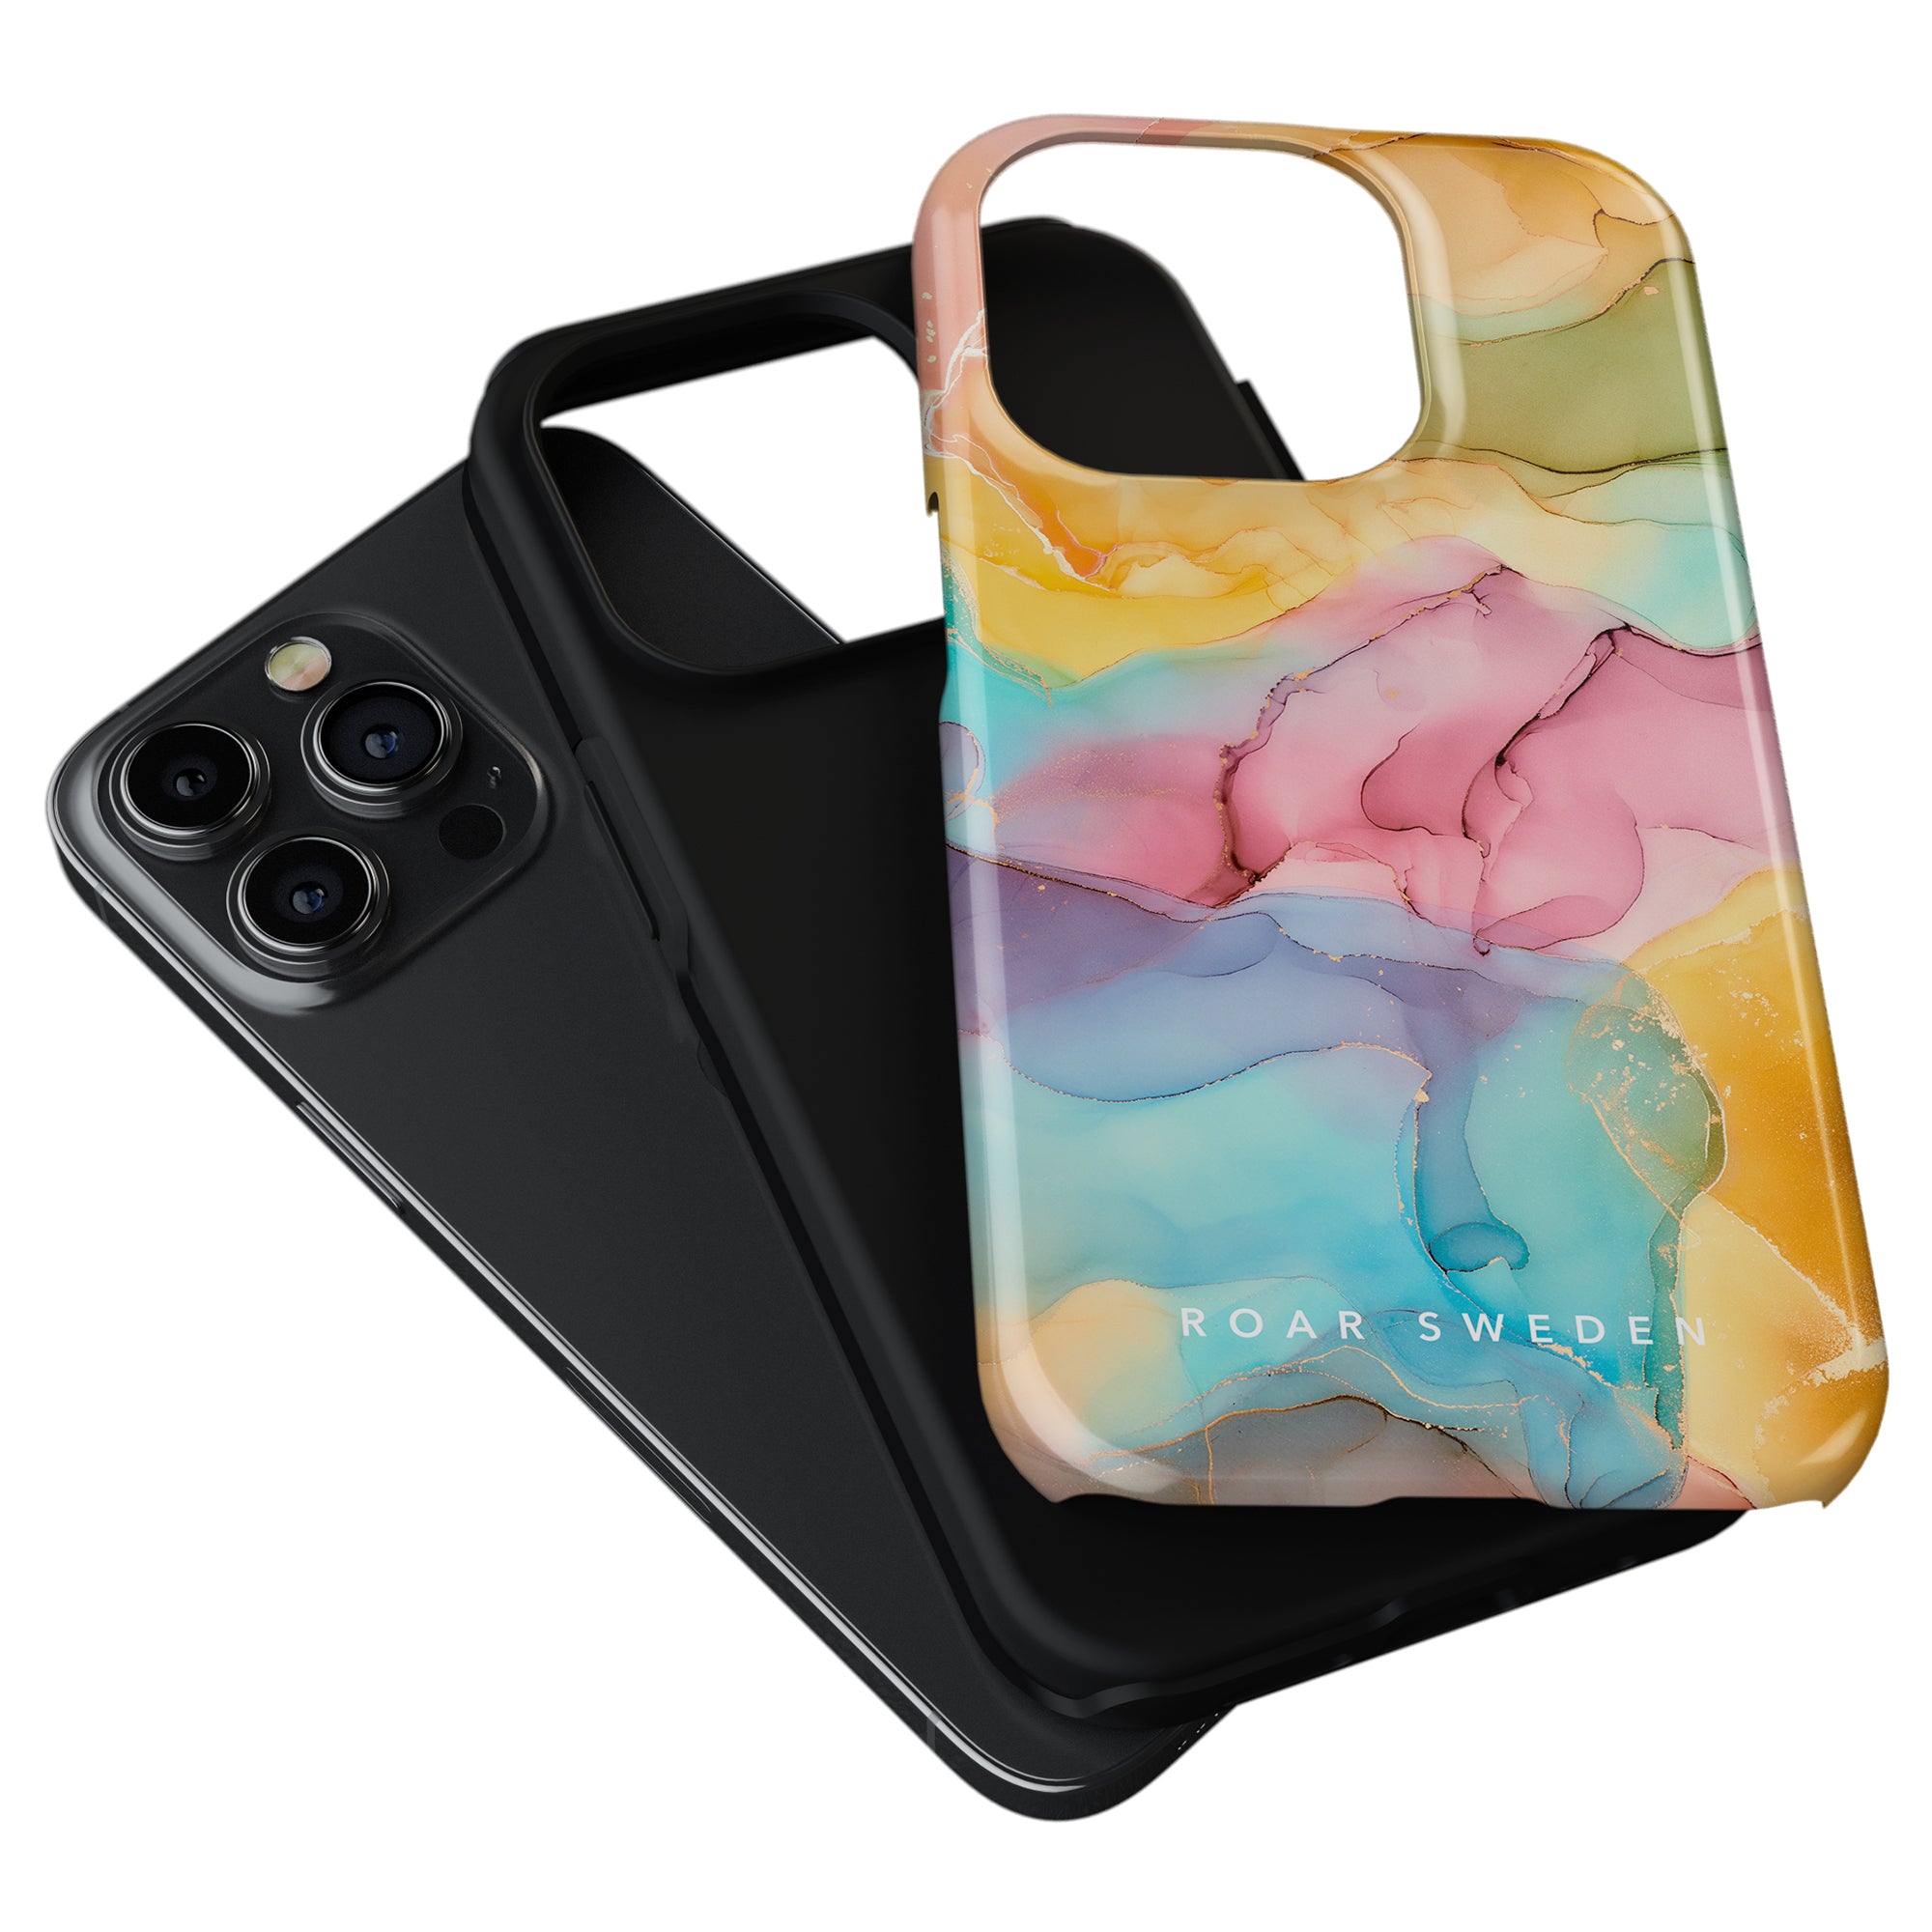 Two Summer Breeze tough smartphone cases, one black and one with a colorful marble design, arranged diagonally over a white background.